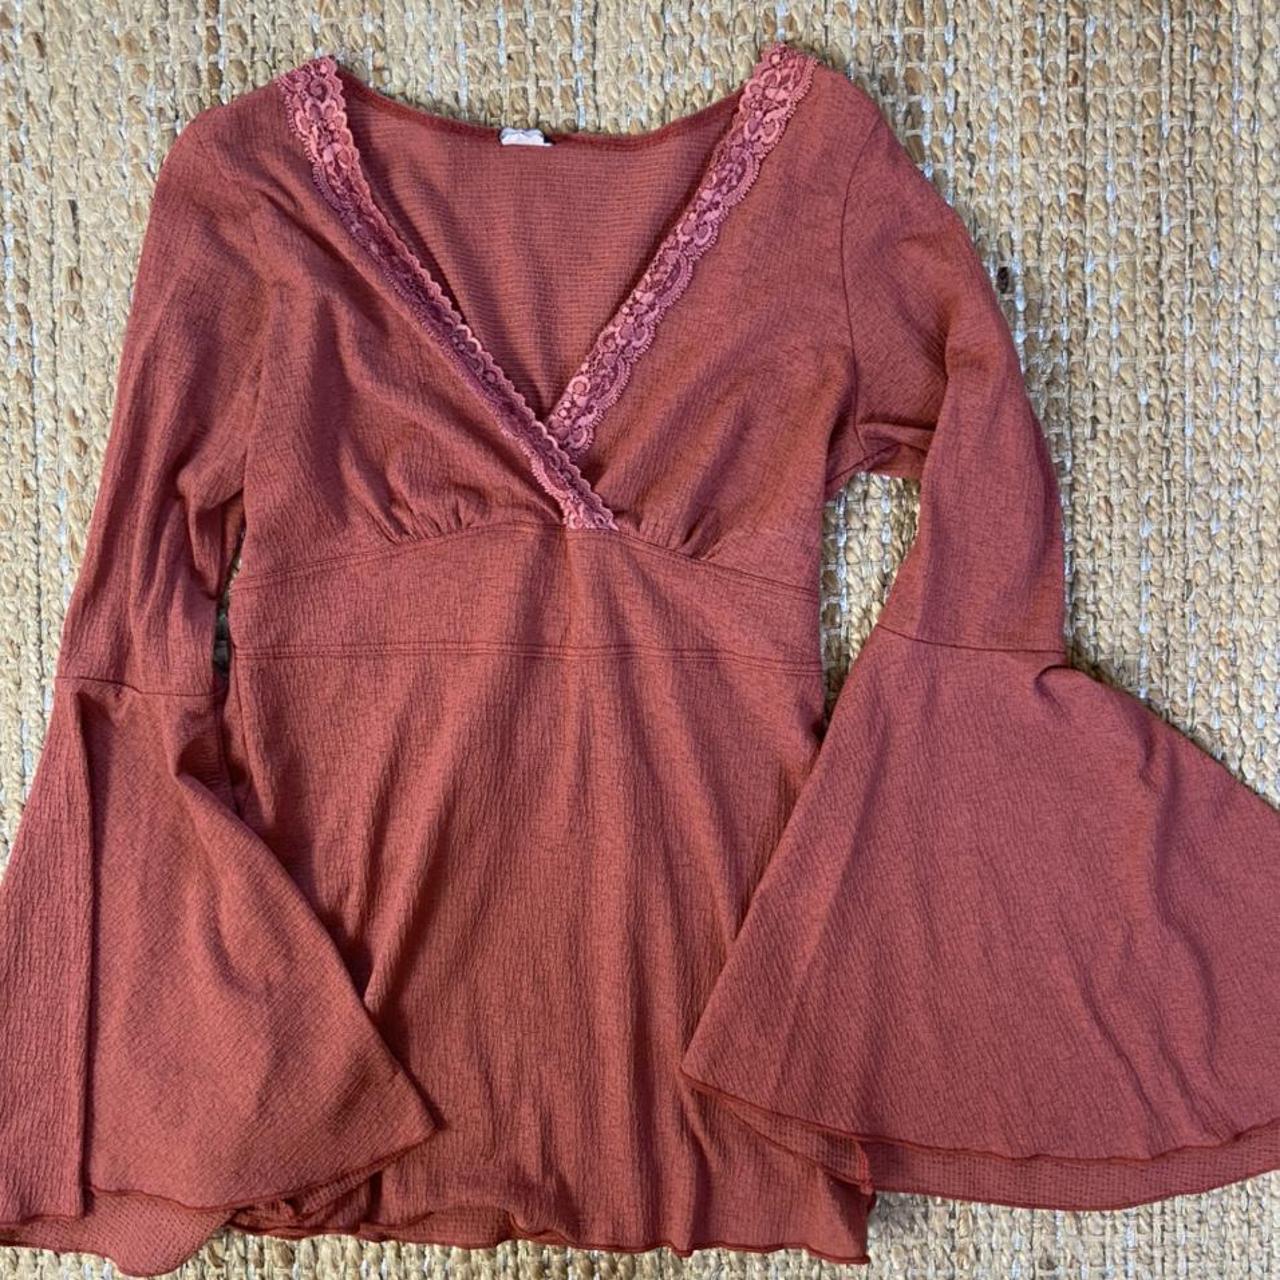 Women's Red and Burgundy